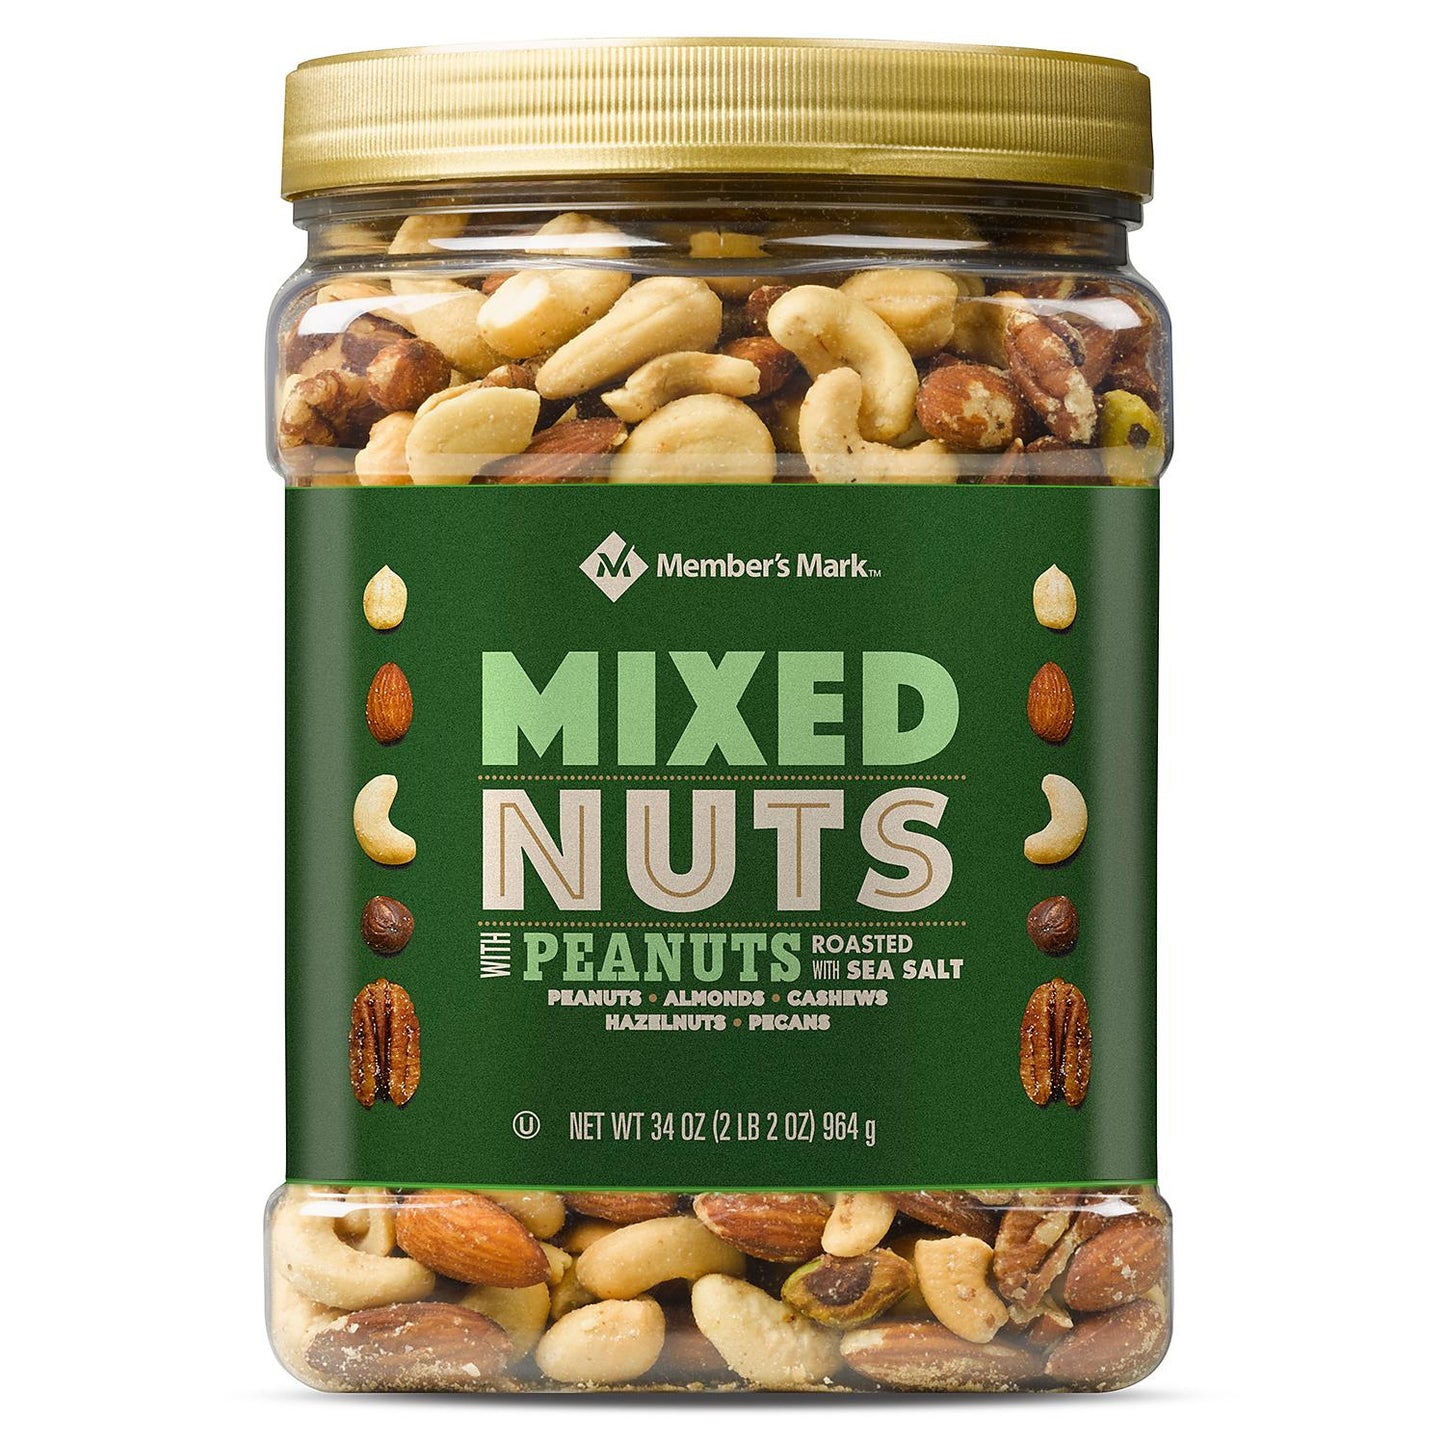 Roasted and Salted Mixed Nuts with Peanuts (34 oz.)